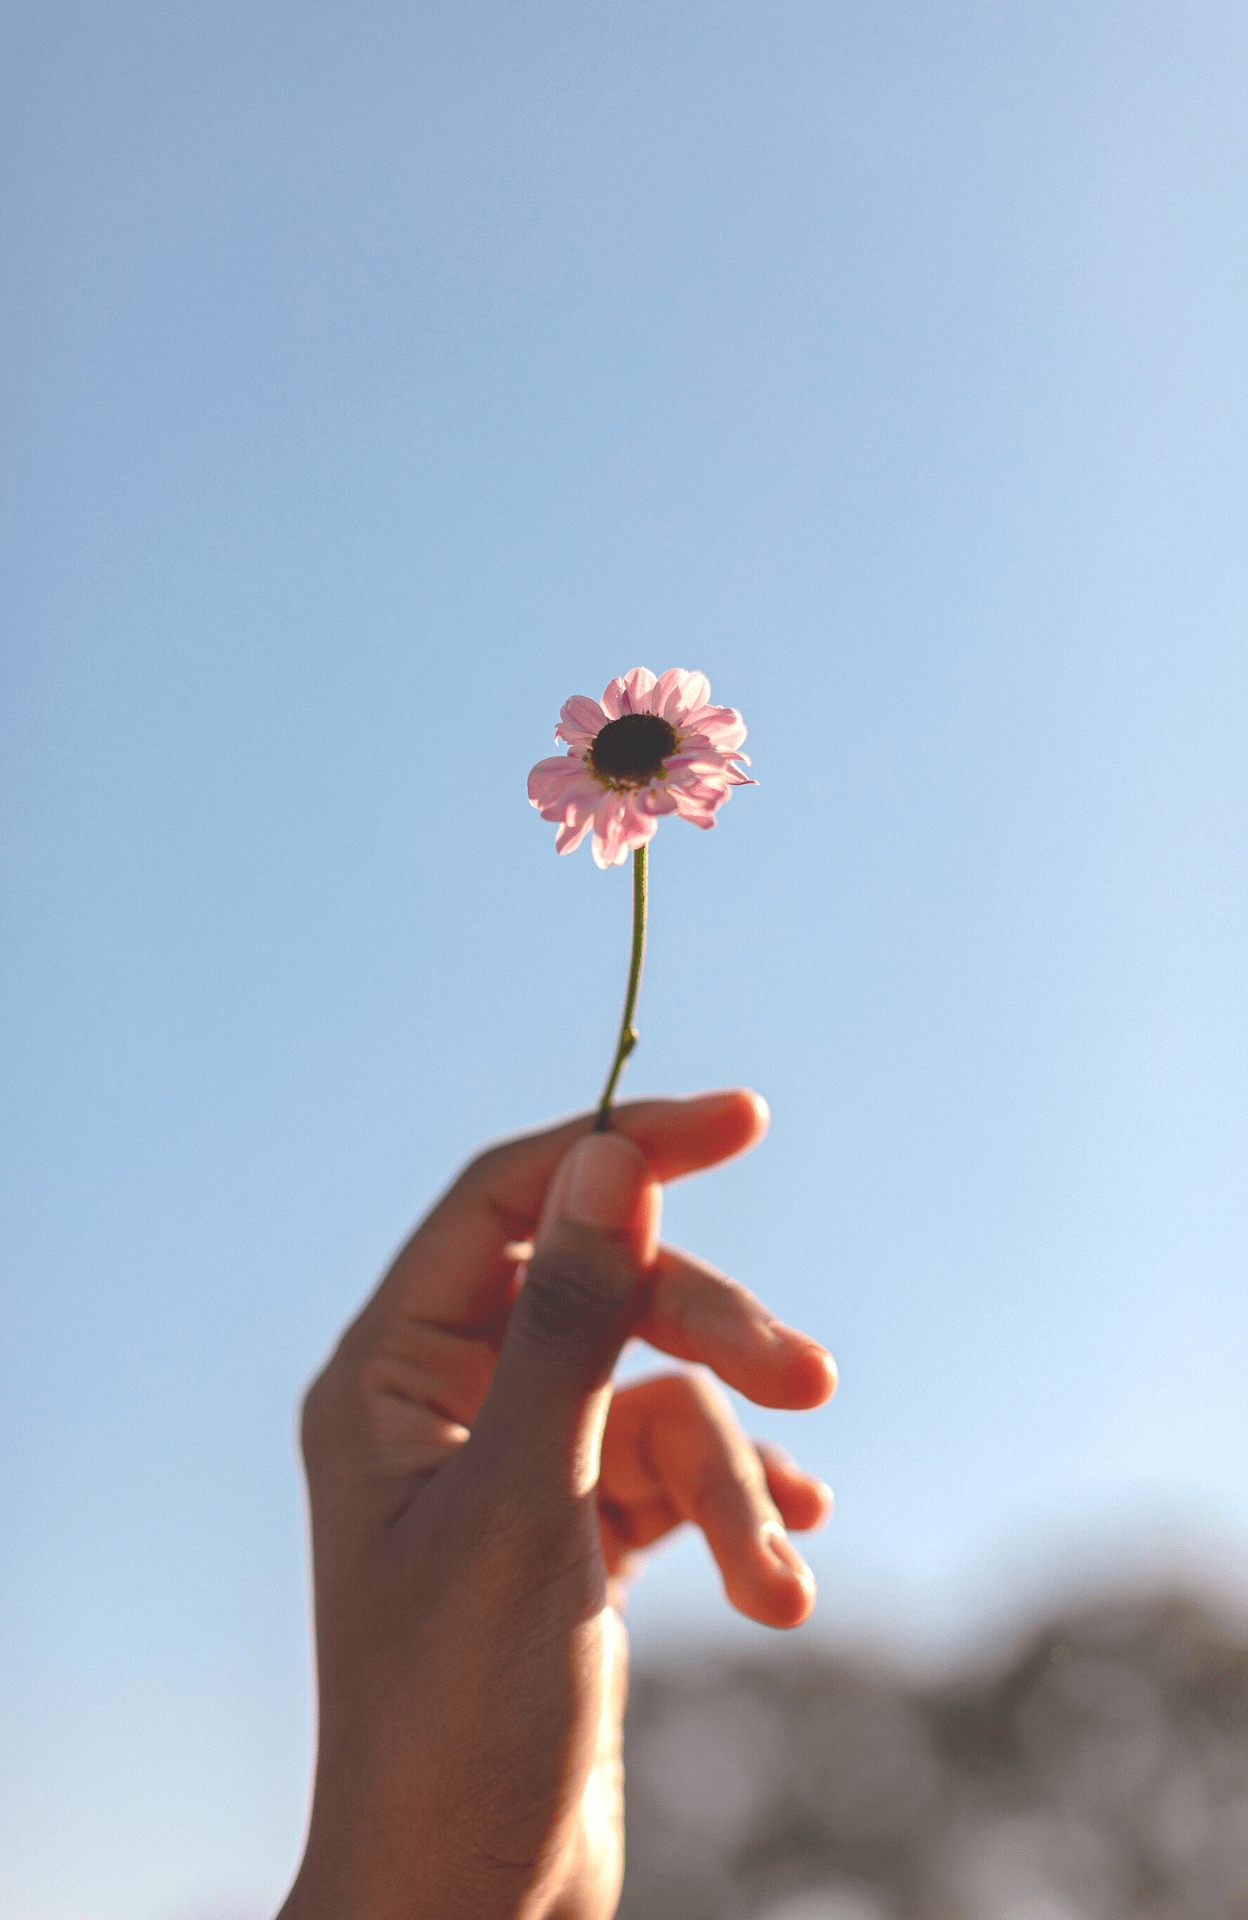 Hand holding a flower with the sky in background